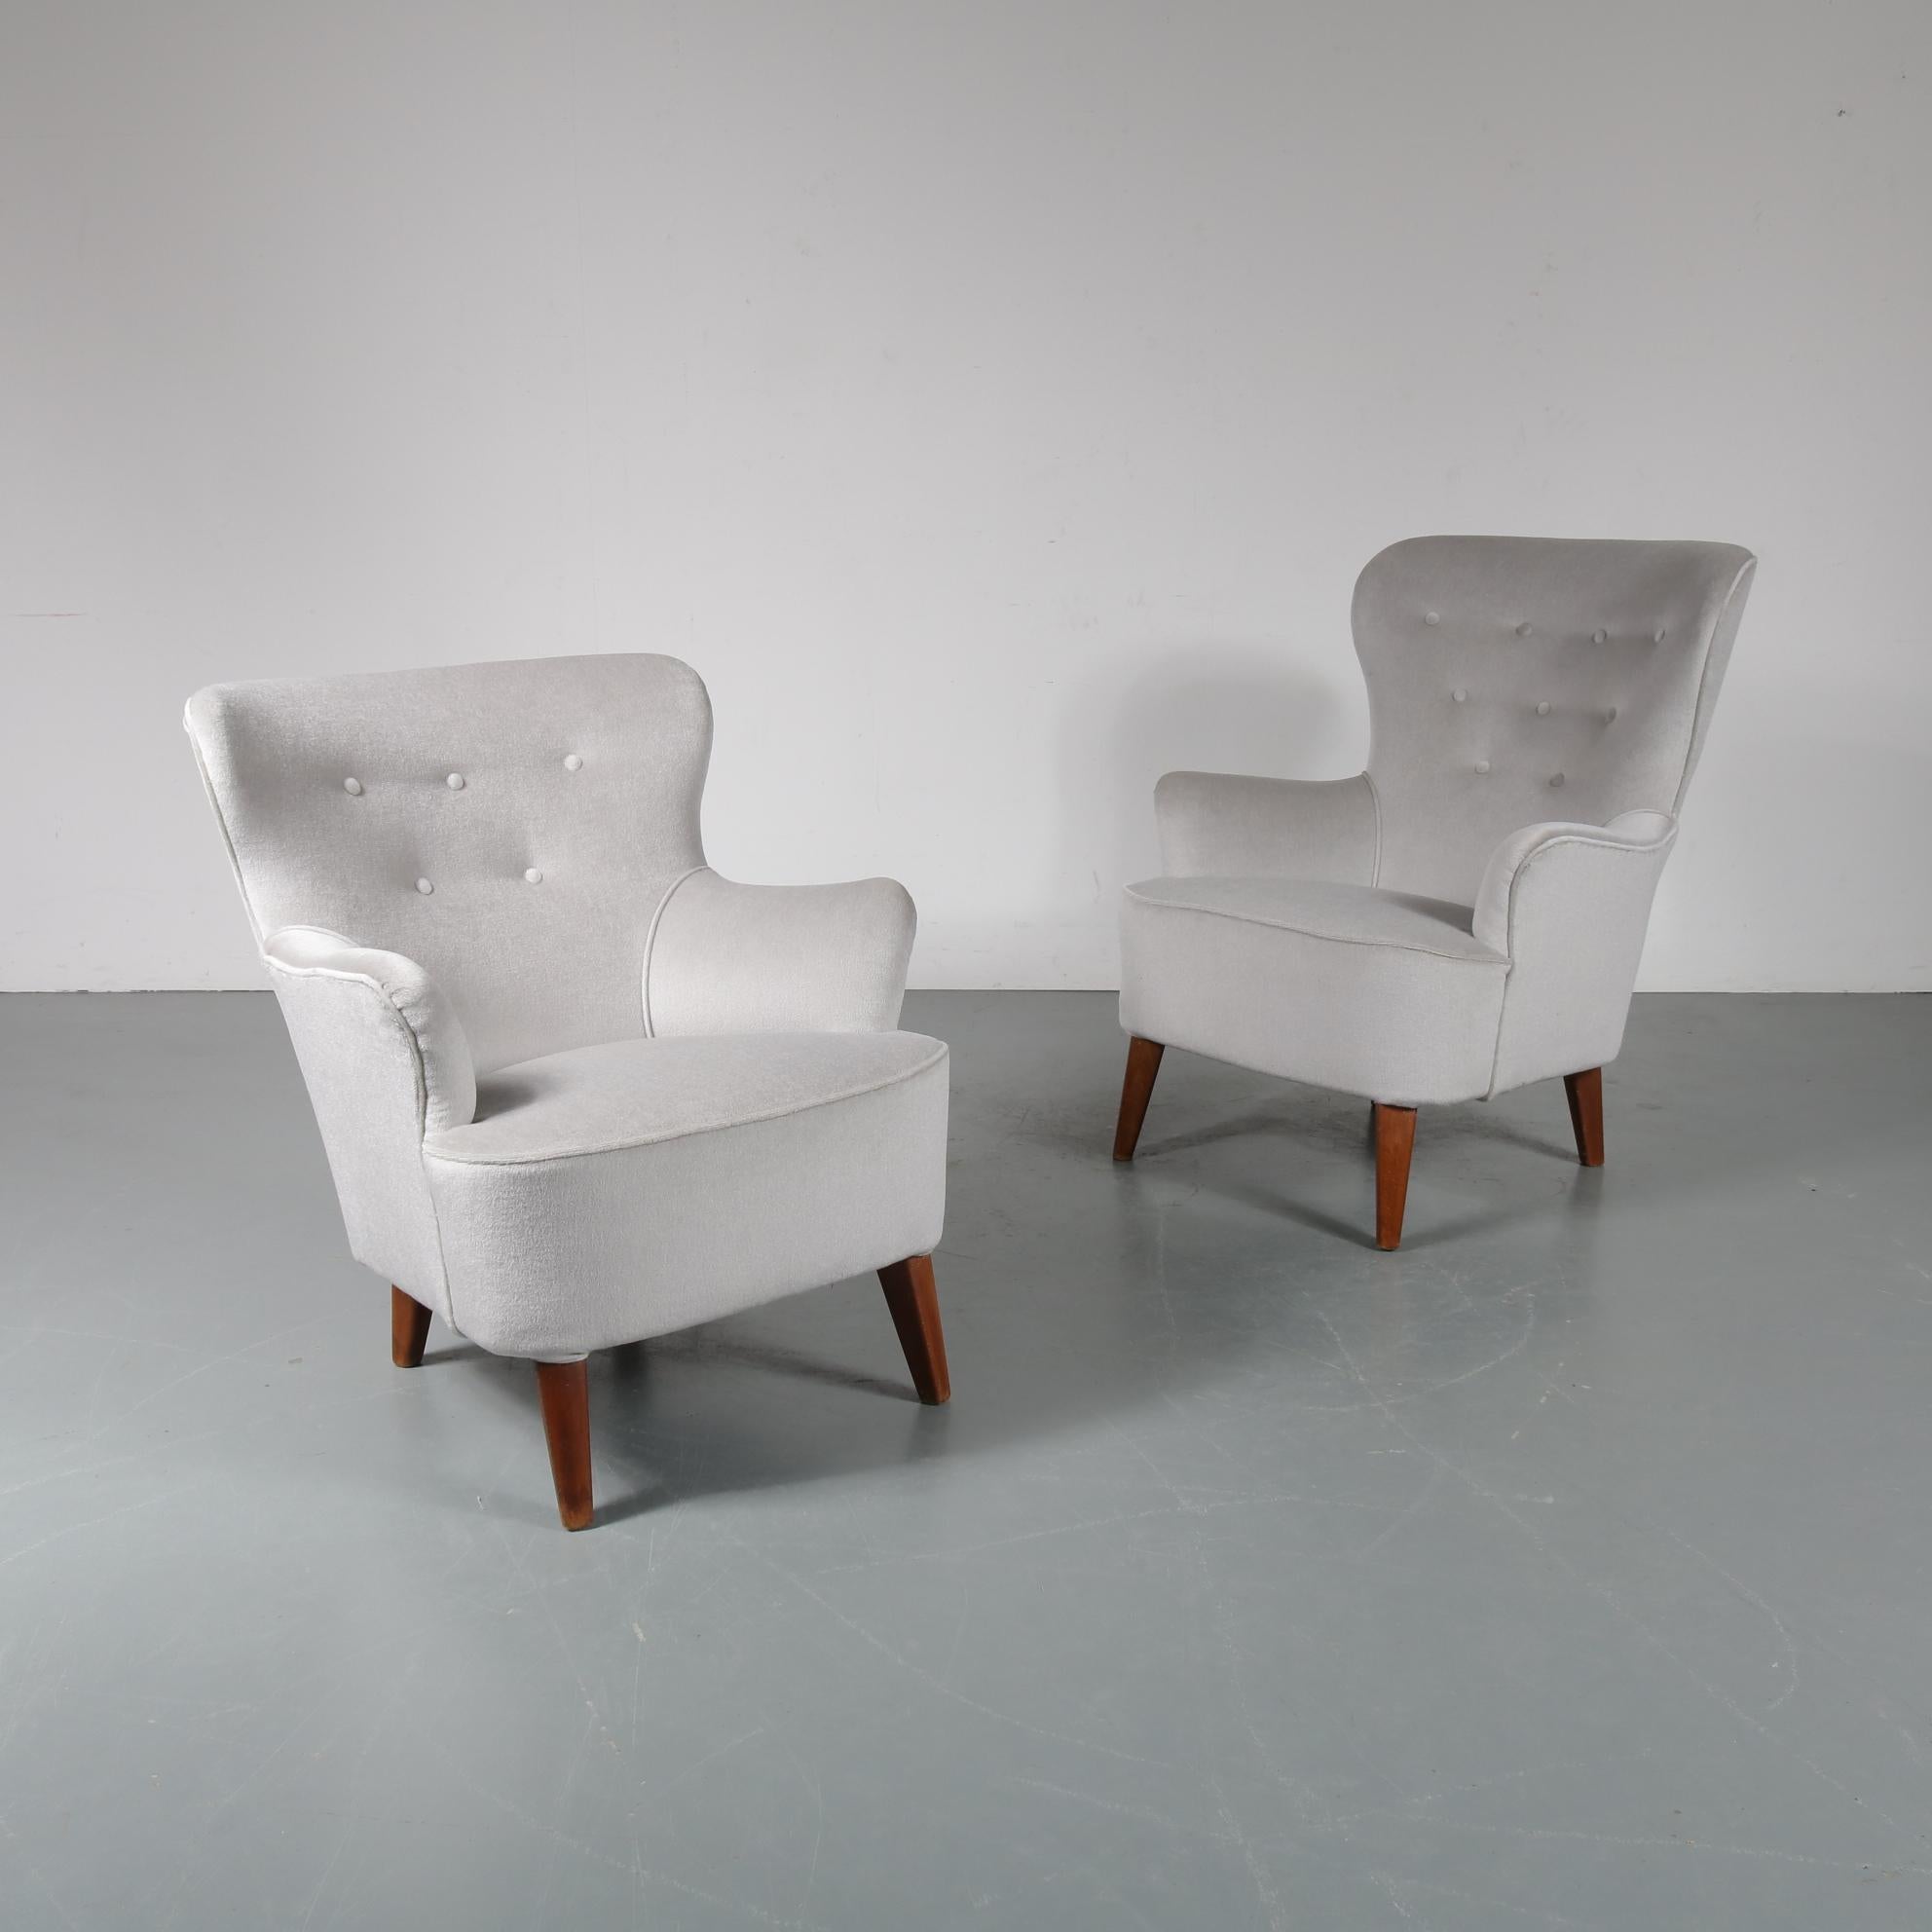 An amazing pair of lounge chairs, one highback and one lady chair, designed by Theo Ruth and manufactured by Artifort in the Netherlands, circa 1950.

These beautiful, luxurious chairs are upholstered in high quality grey Chivasso Silence fabric.